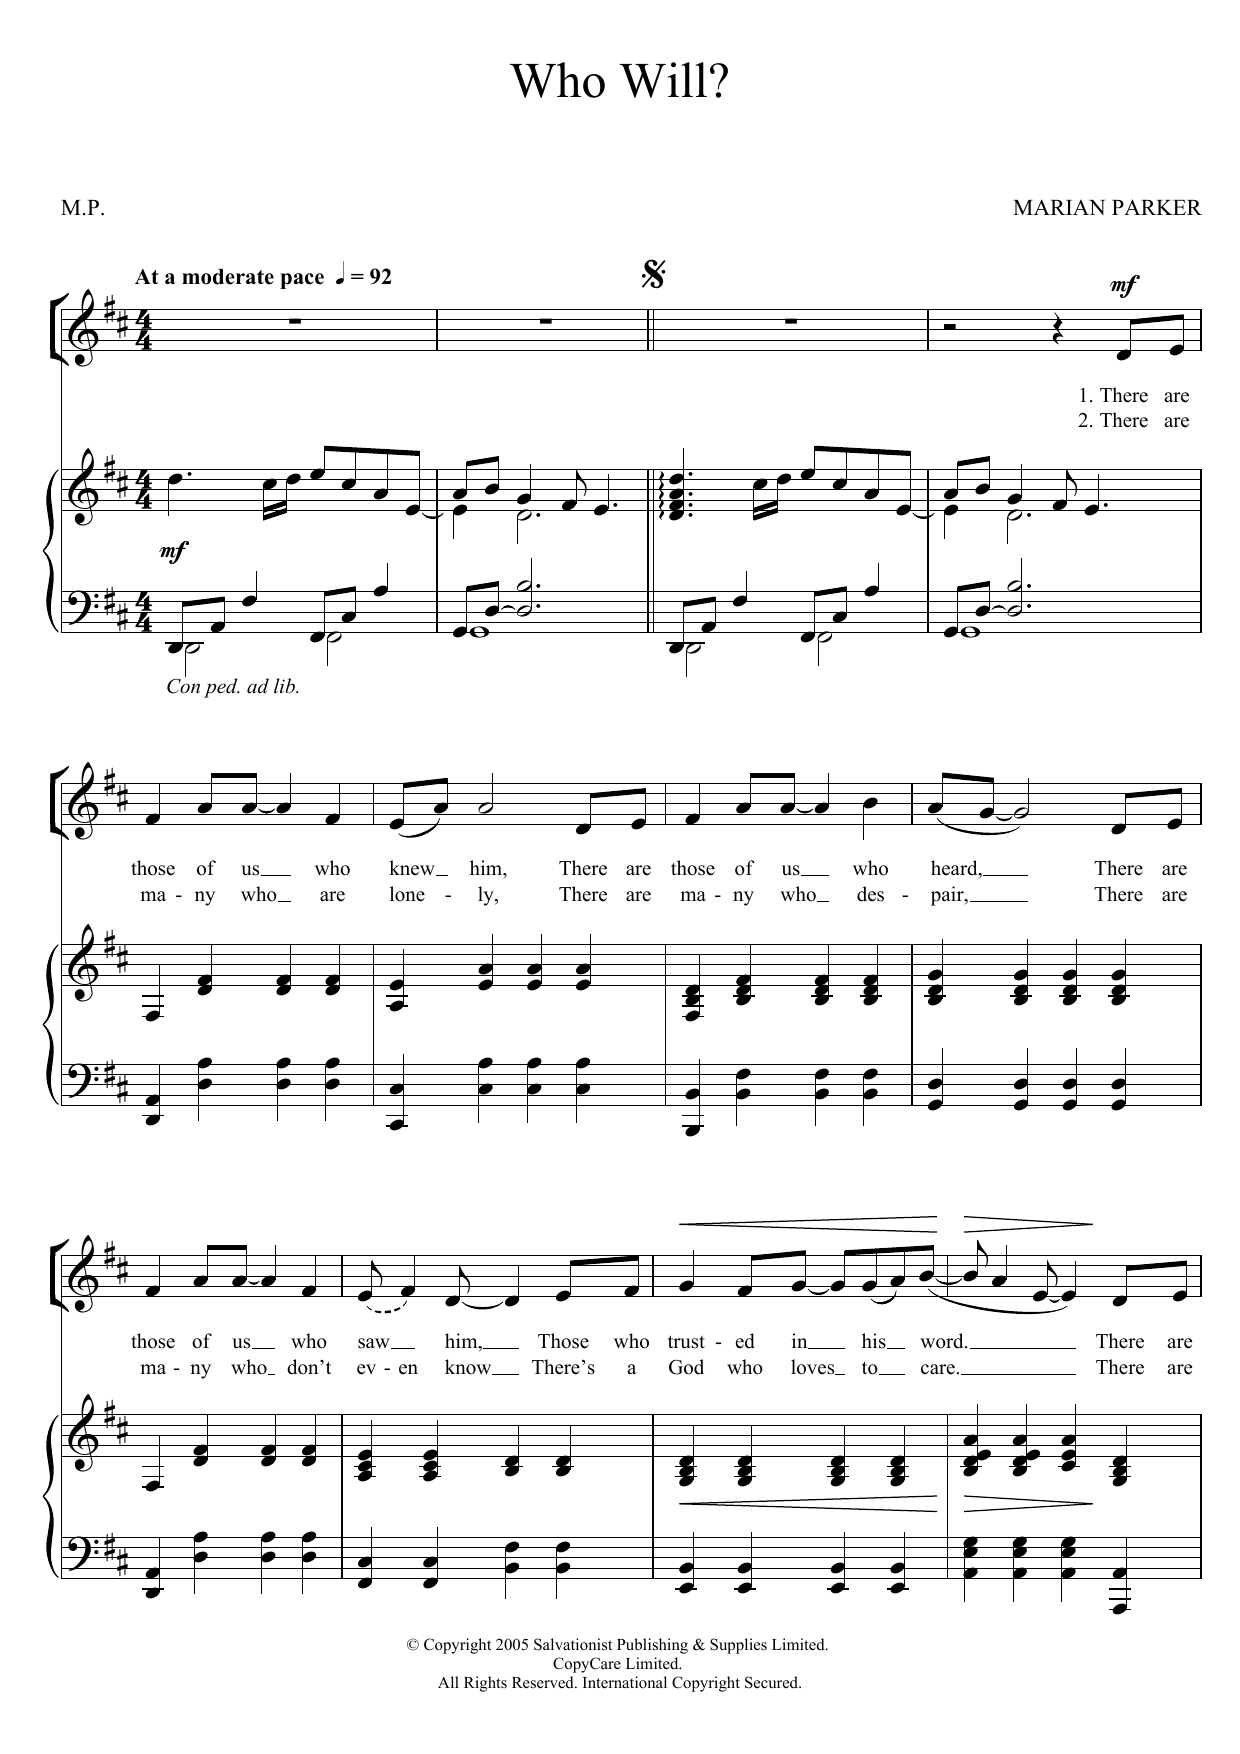 Download The Salvation Army Who Will? Sheet Music